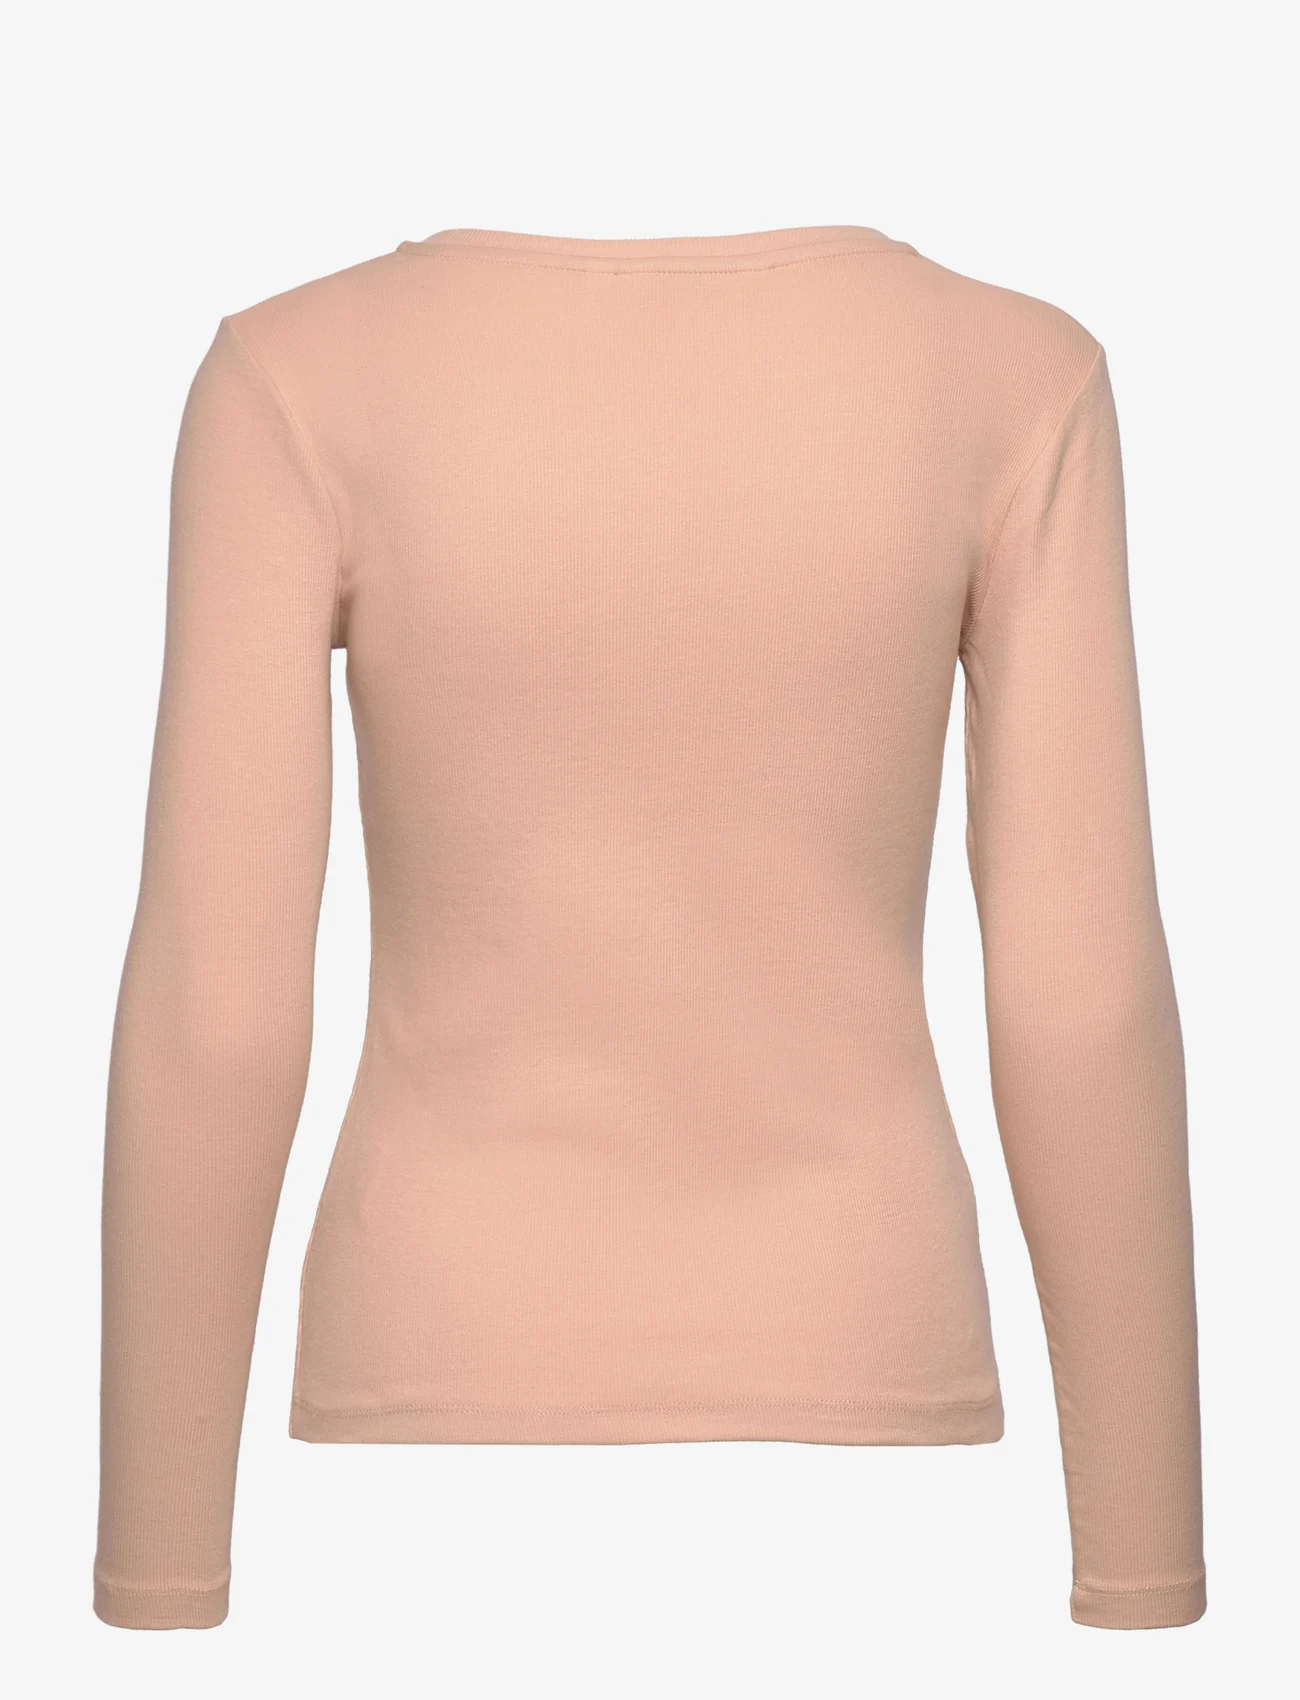 Basic Apparel - Ludmilla LS Tee GOTS - long-sleeved tops - rose dust - 1